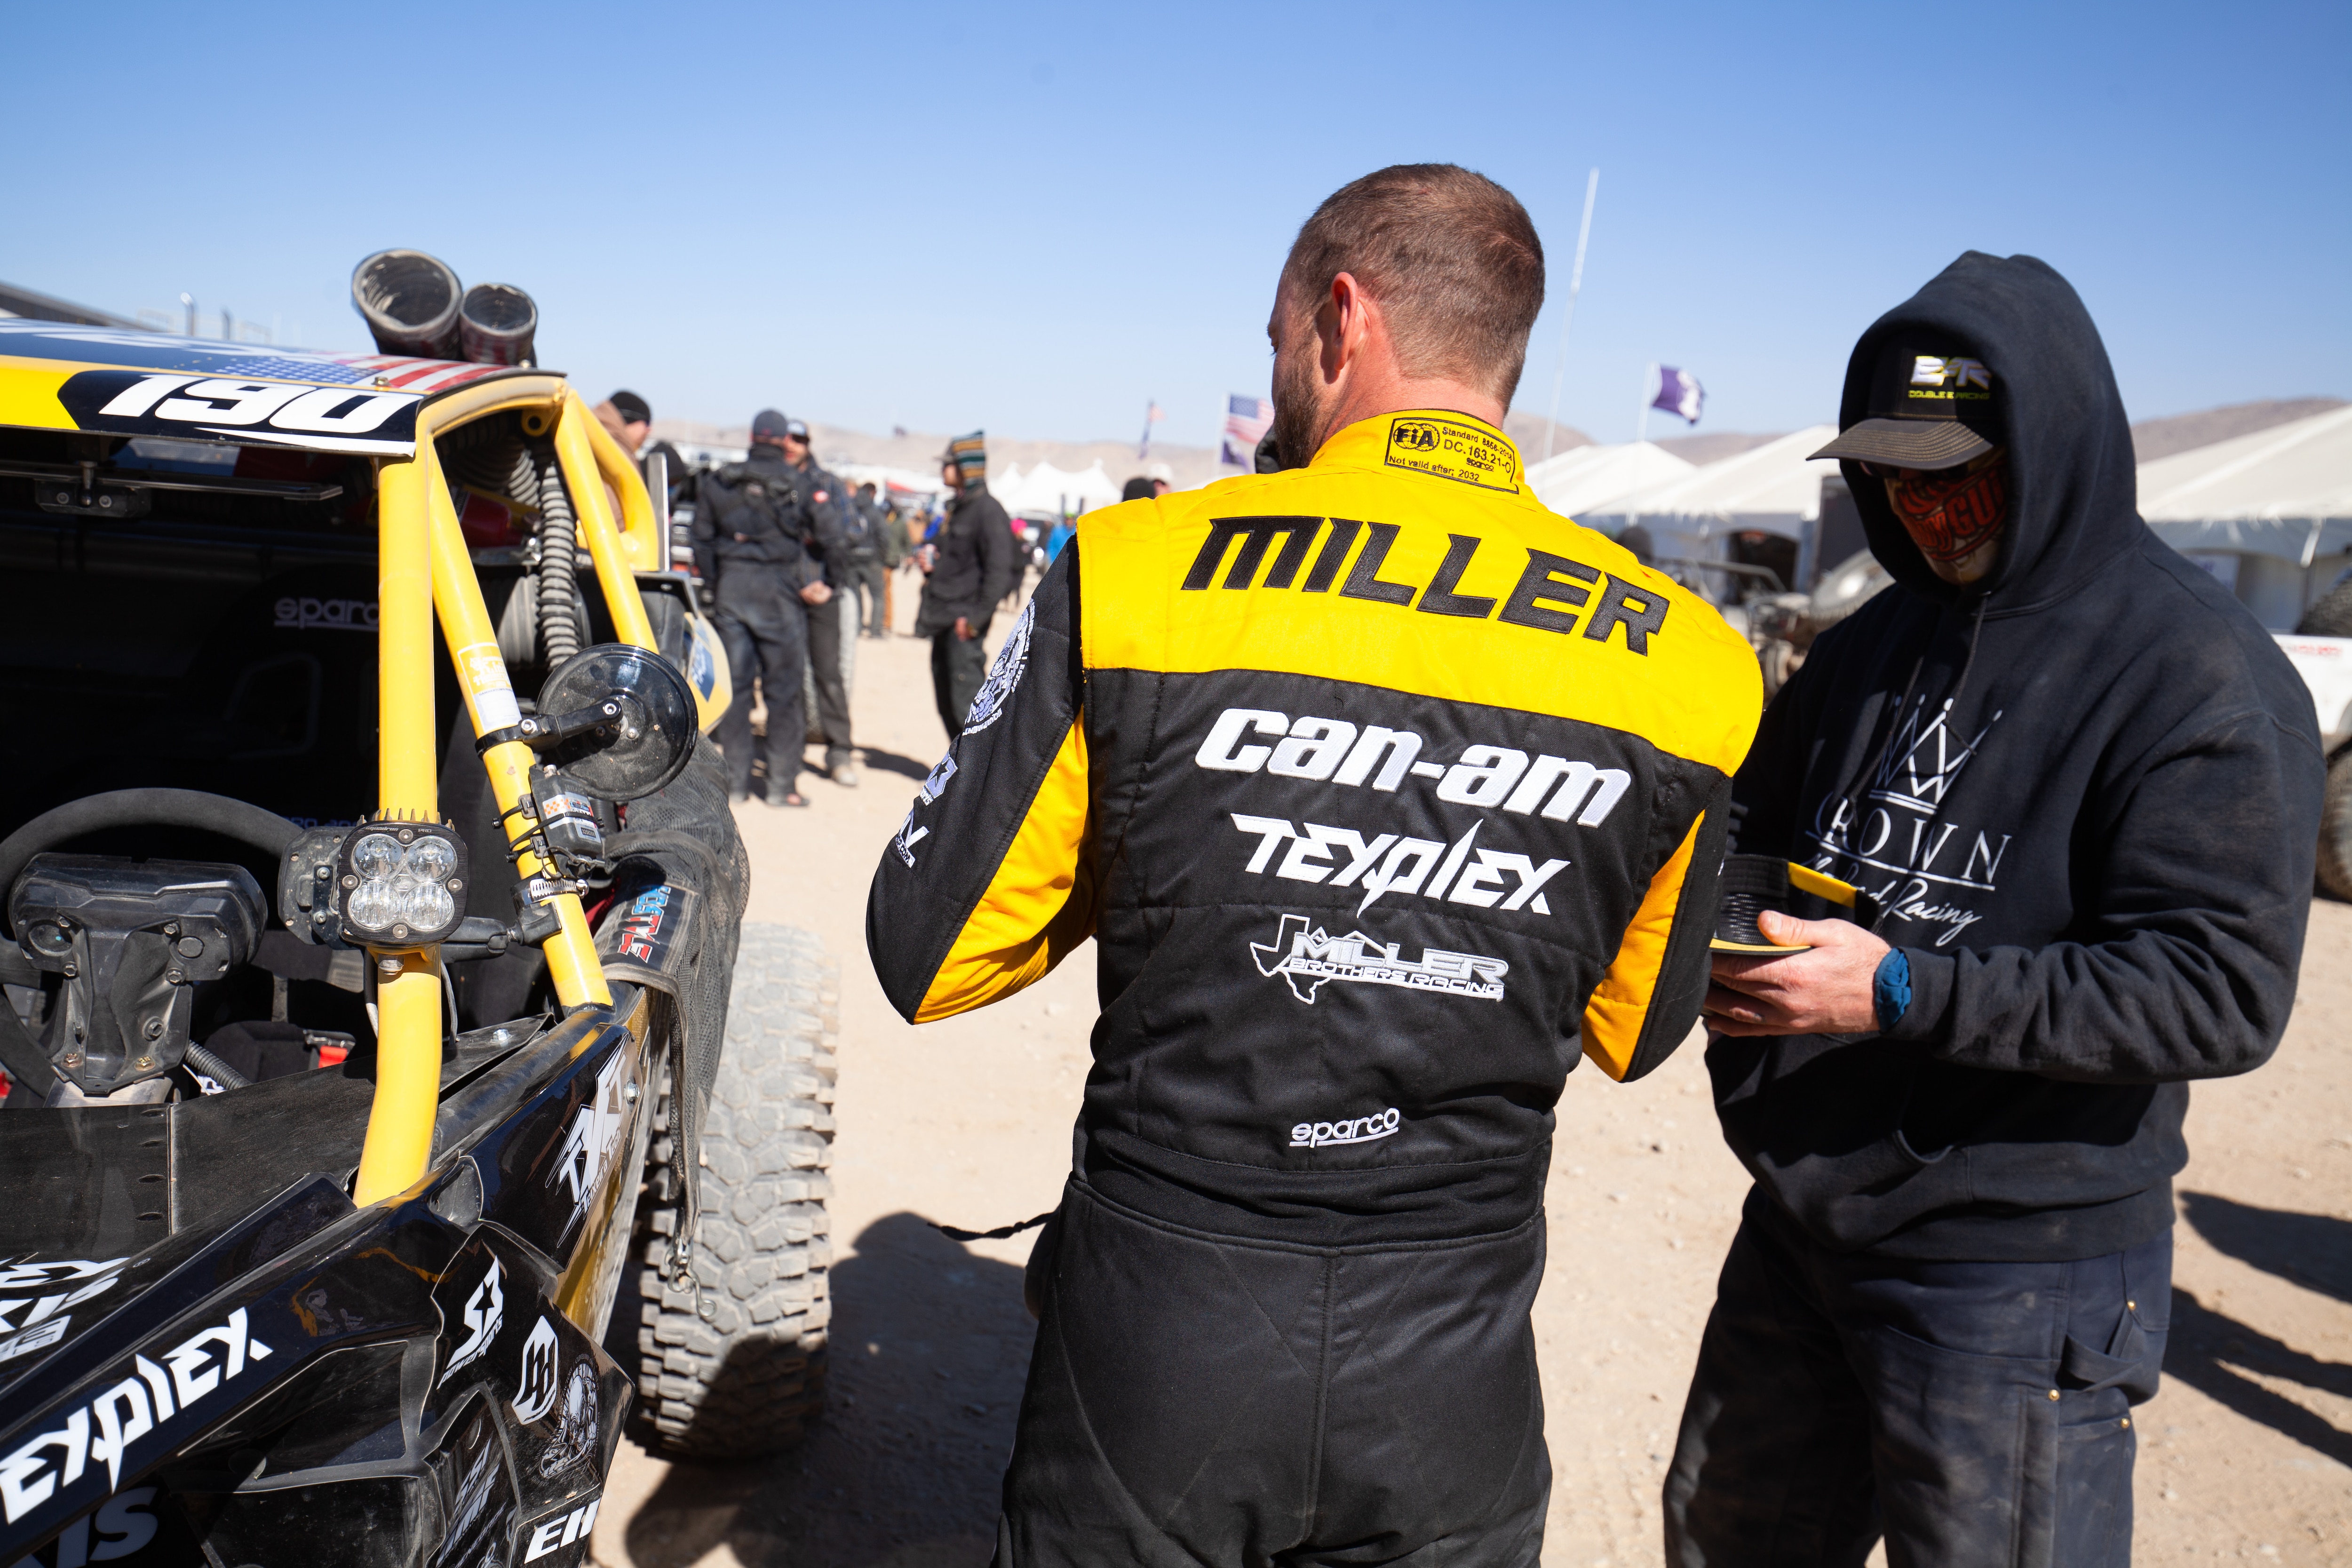 Hunter Miller standing outside his Maverick X3 during KOH, wearing his racing jacket with his name across the back.